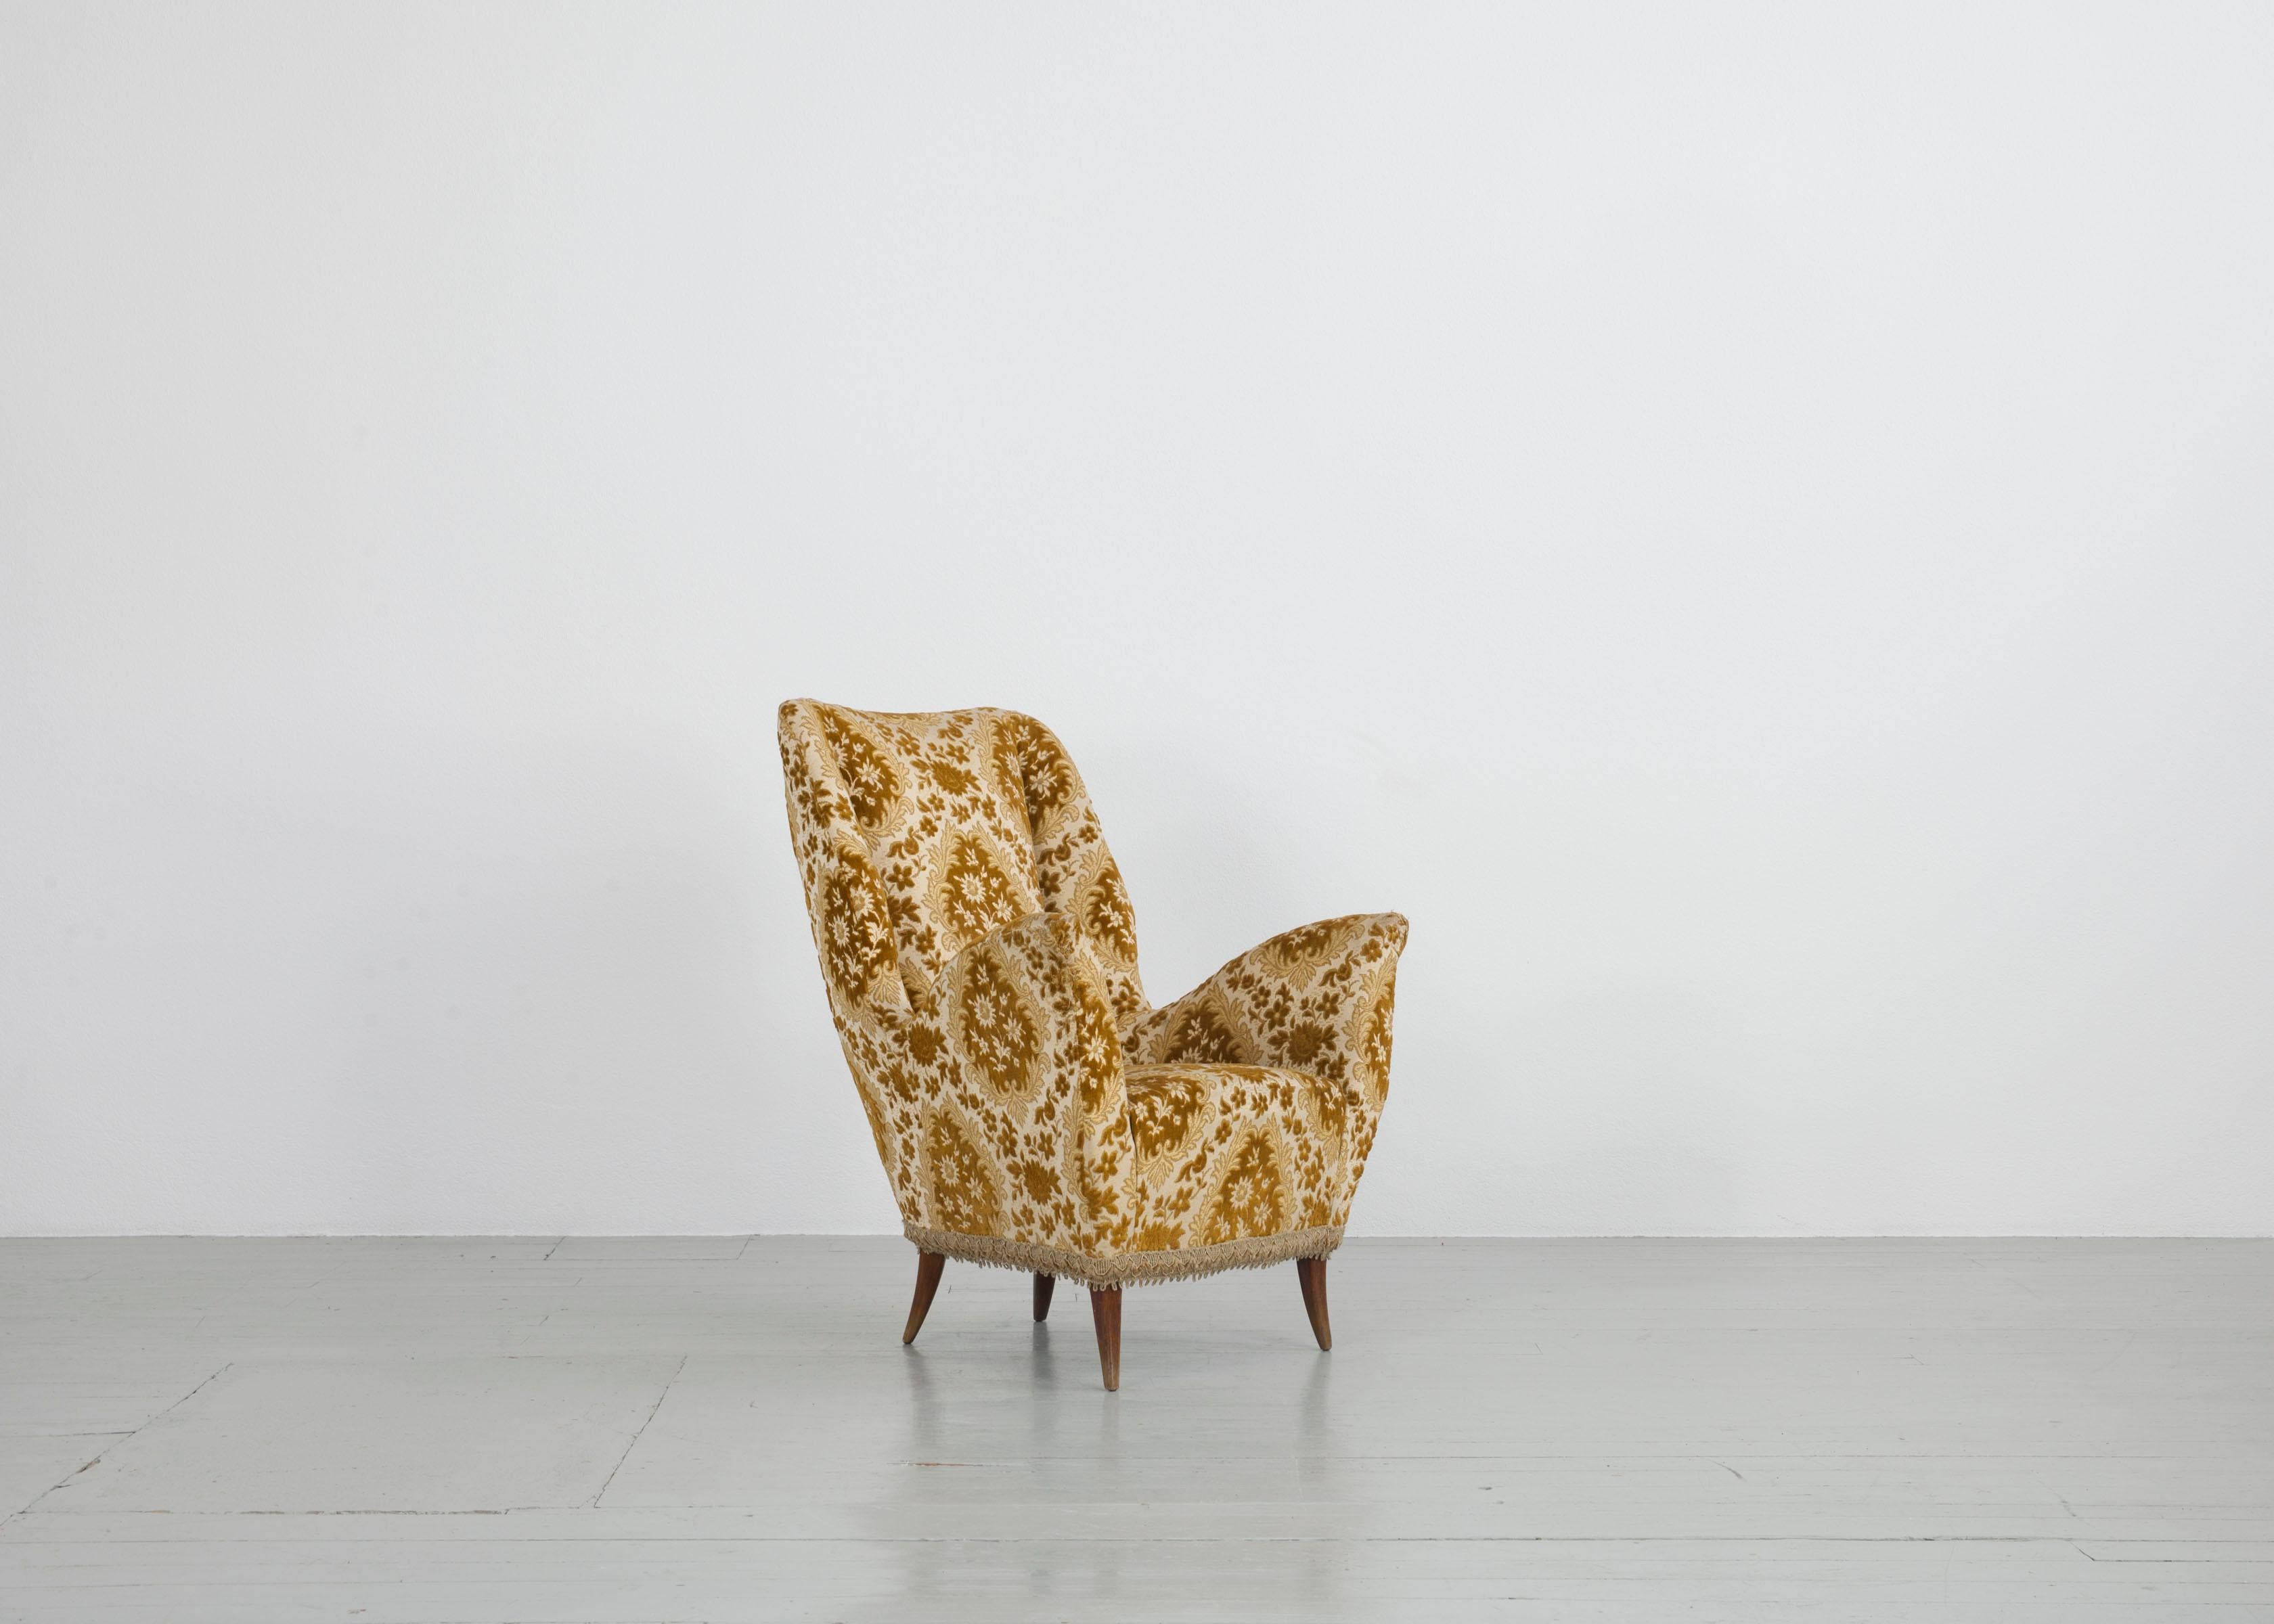 This extravagant Italian armchair was made by I.S.A. Bergamo in the 1950s. The furniture body is covered by yellow brocade fabric and is supported by four patinated wooden legs. The armchair is in vintage condition.

Do not hesitate to contact us